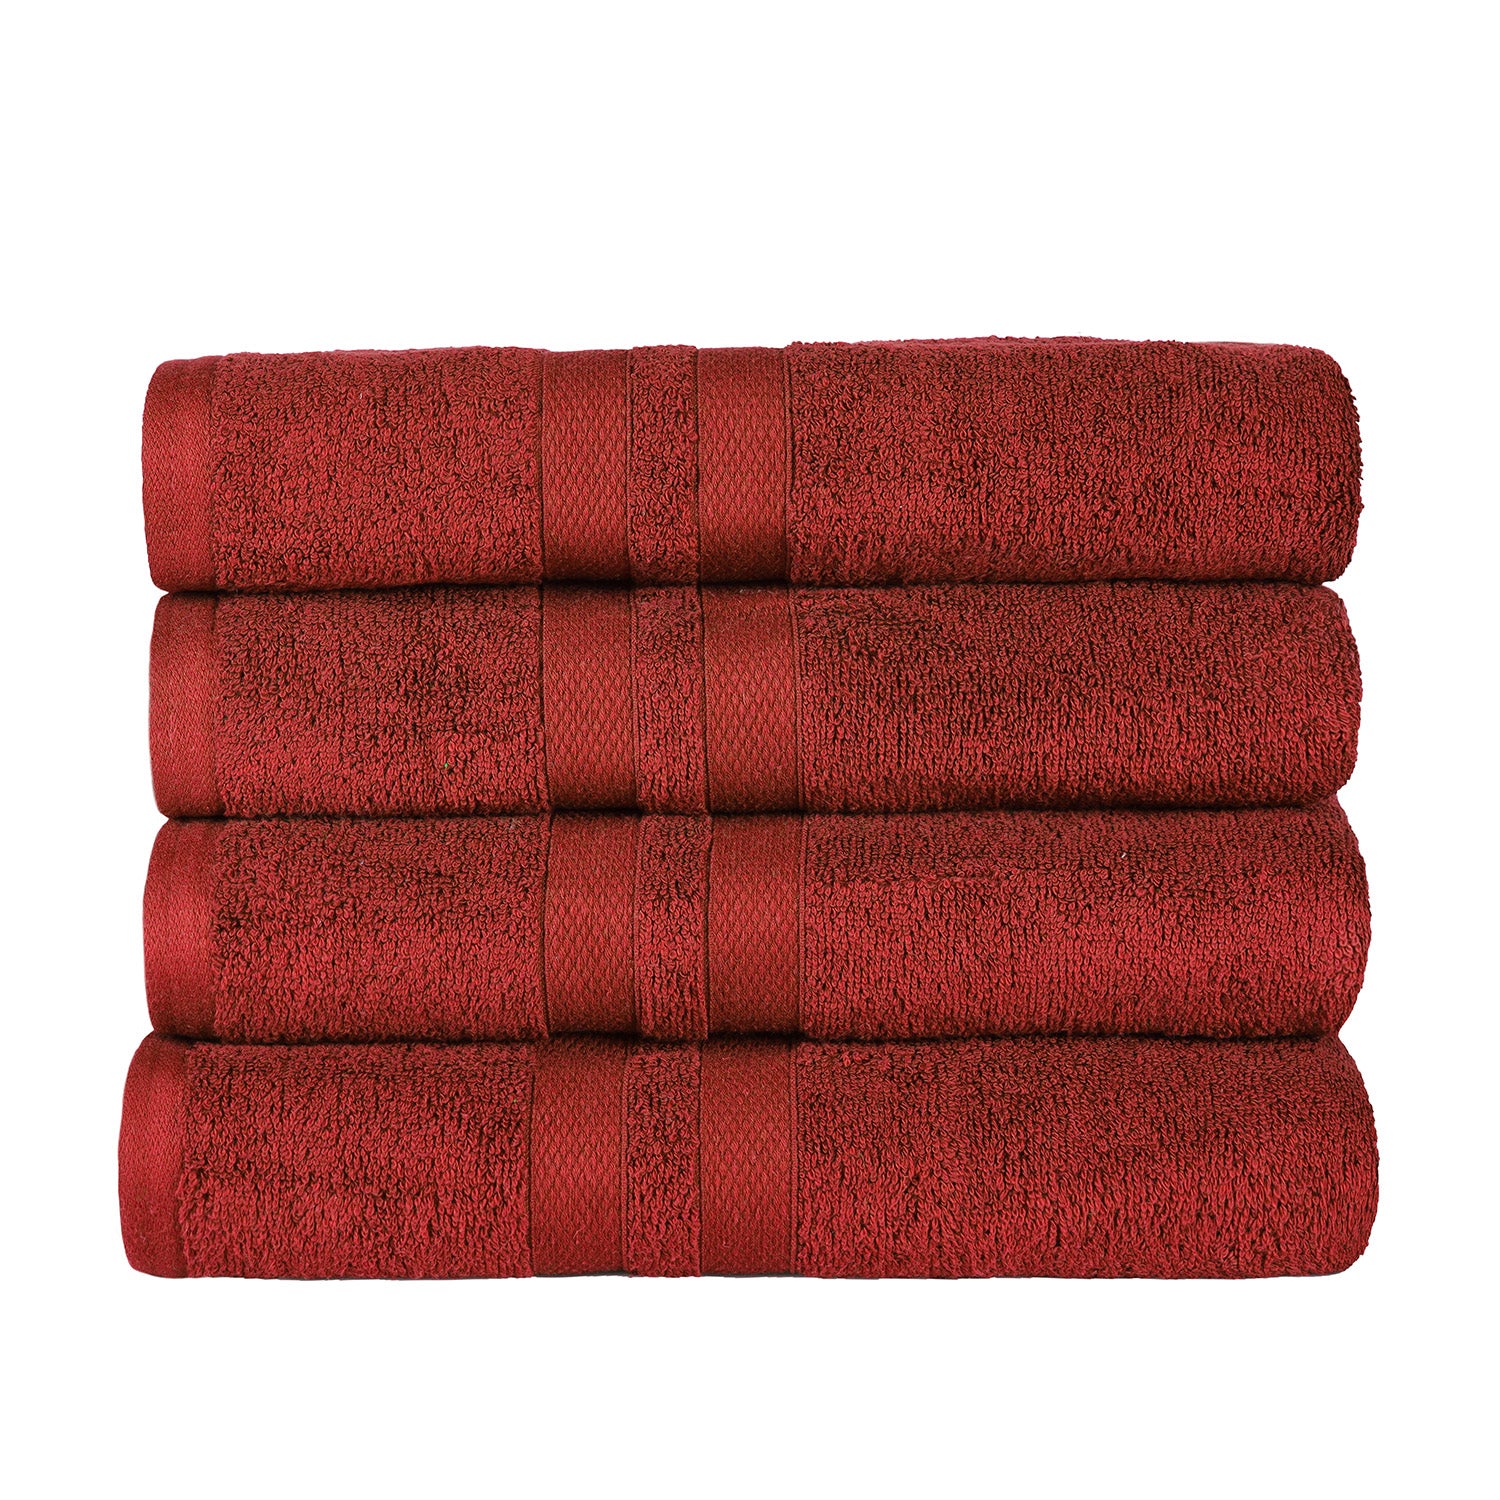 Superior Ultra Soft Cotton Absorbent Solid Bath Towel (Set of 4) - Maroon